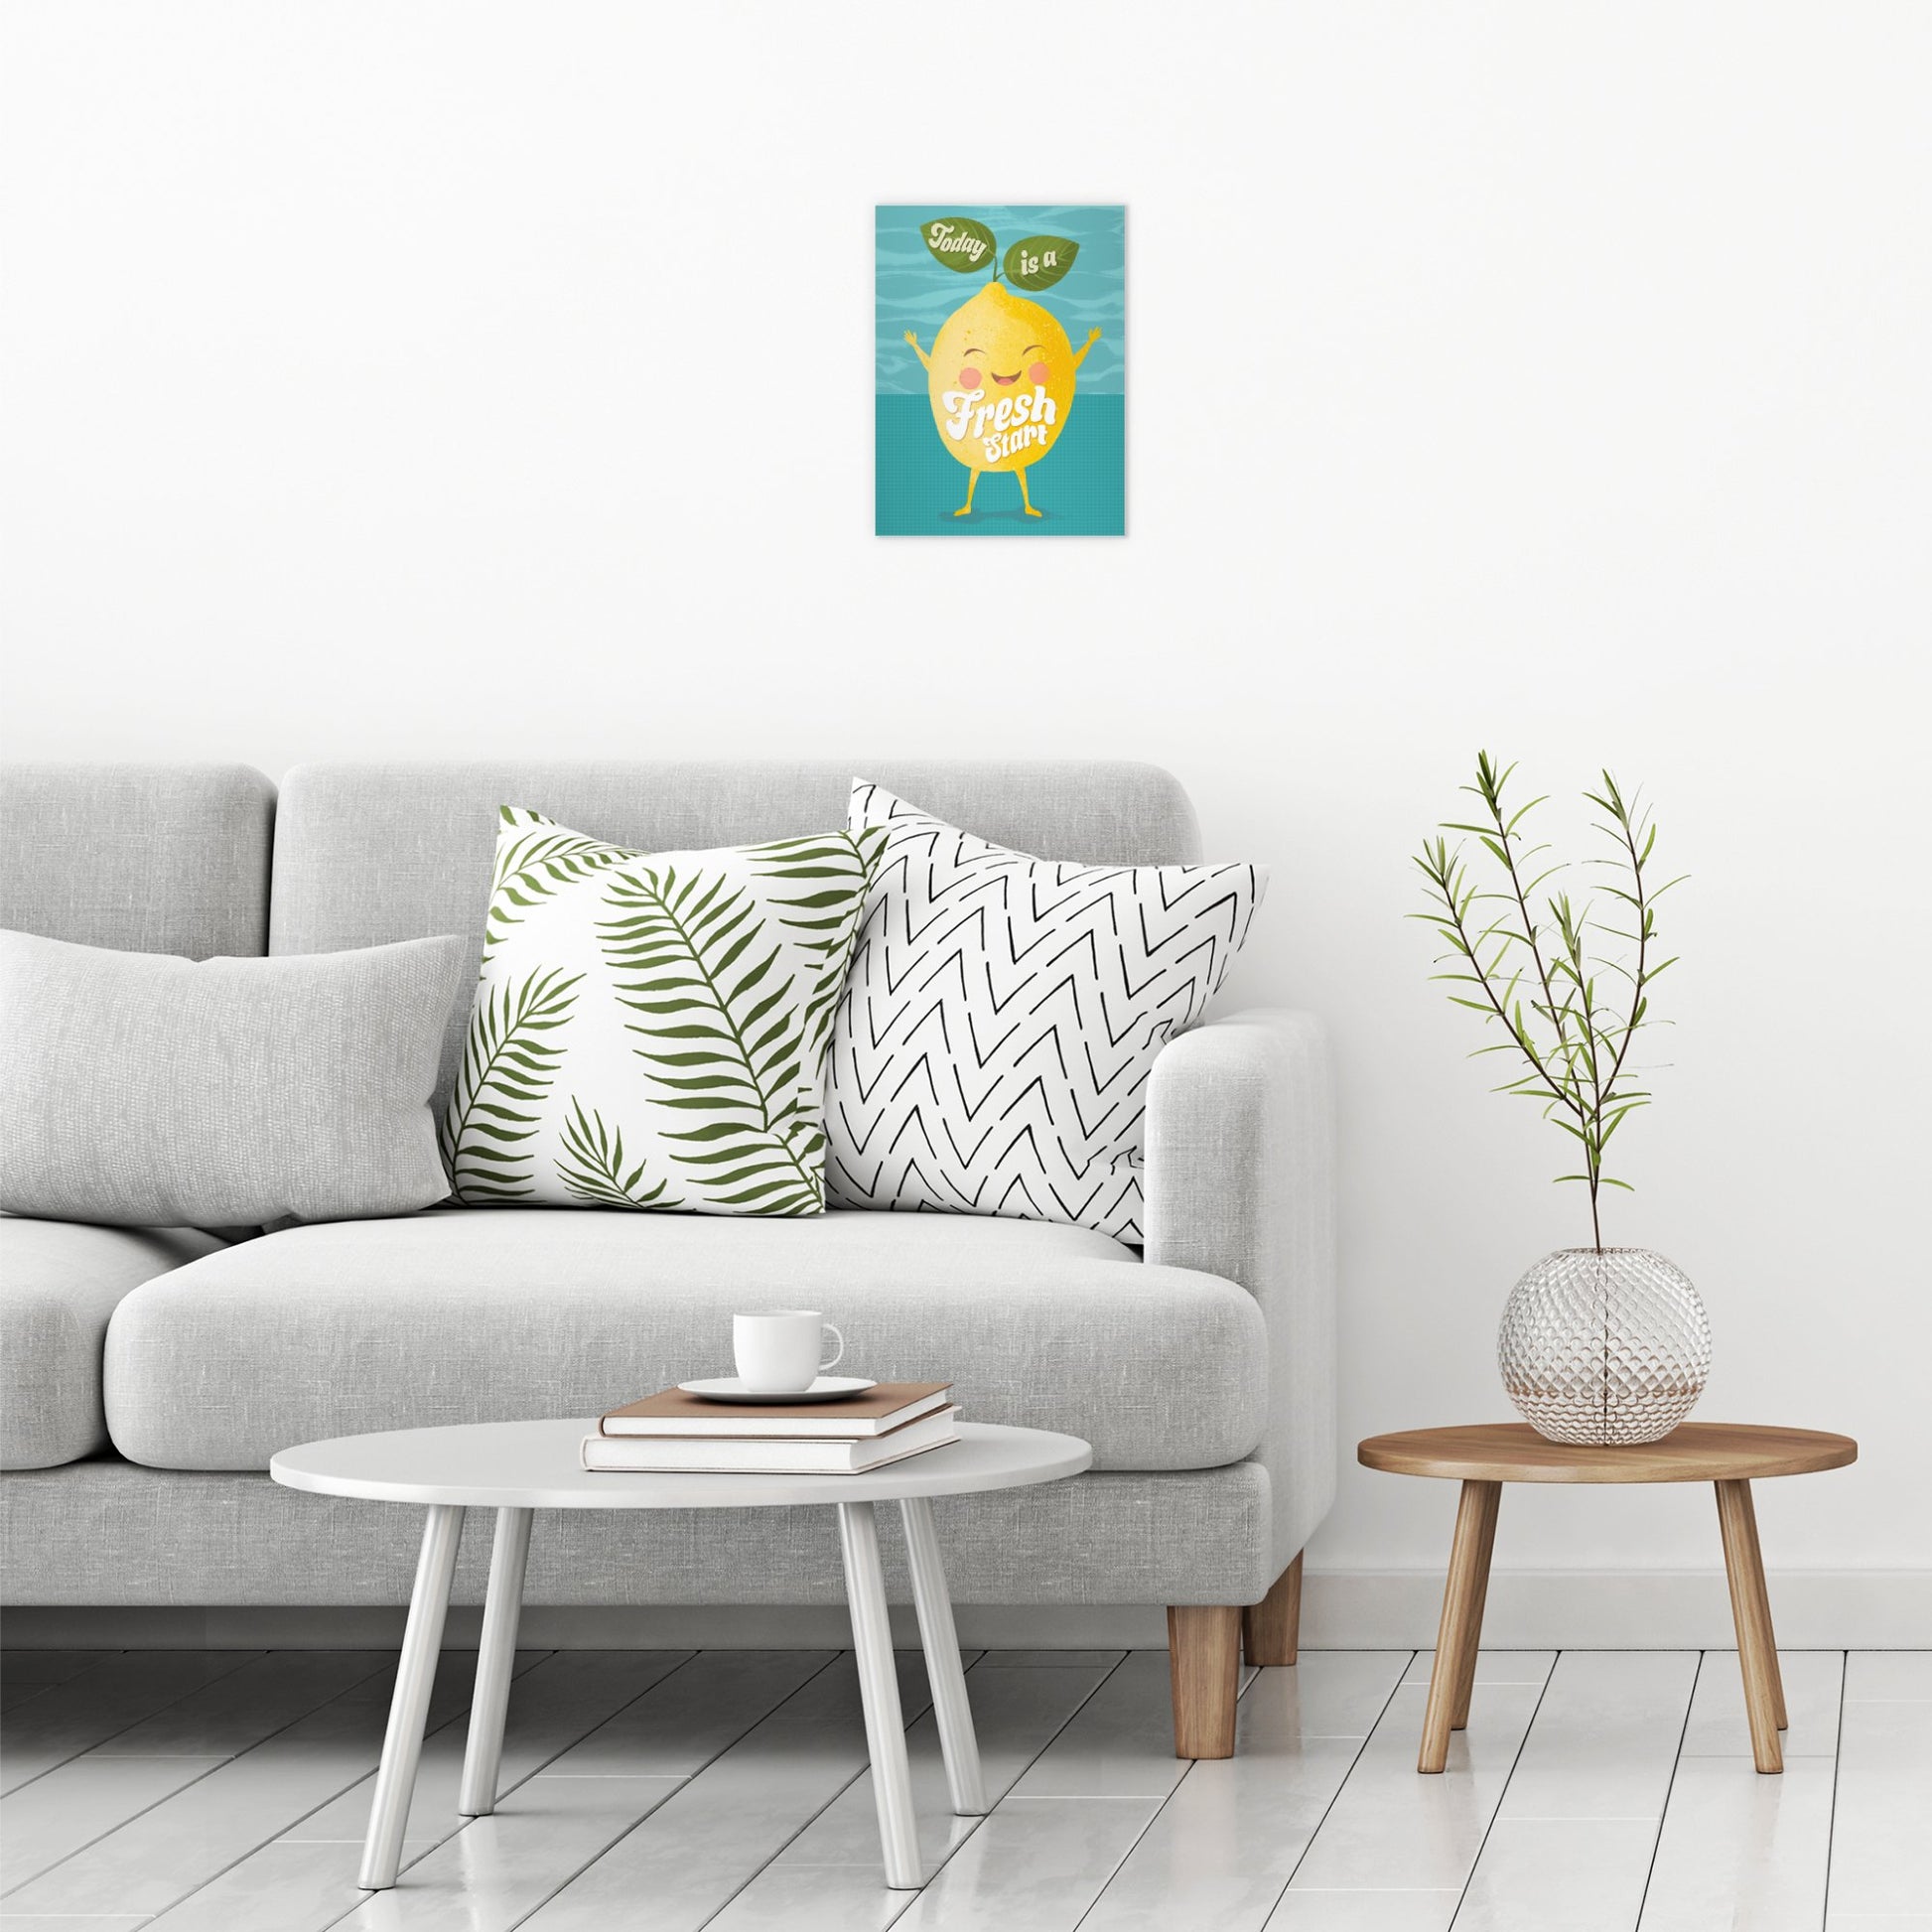 A contemporary modern room view showing a small size metal art poster display plate with printed design of a Cute Lemon Quote 'Today is a Fresh Start'